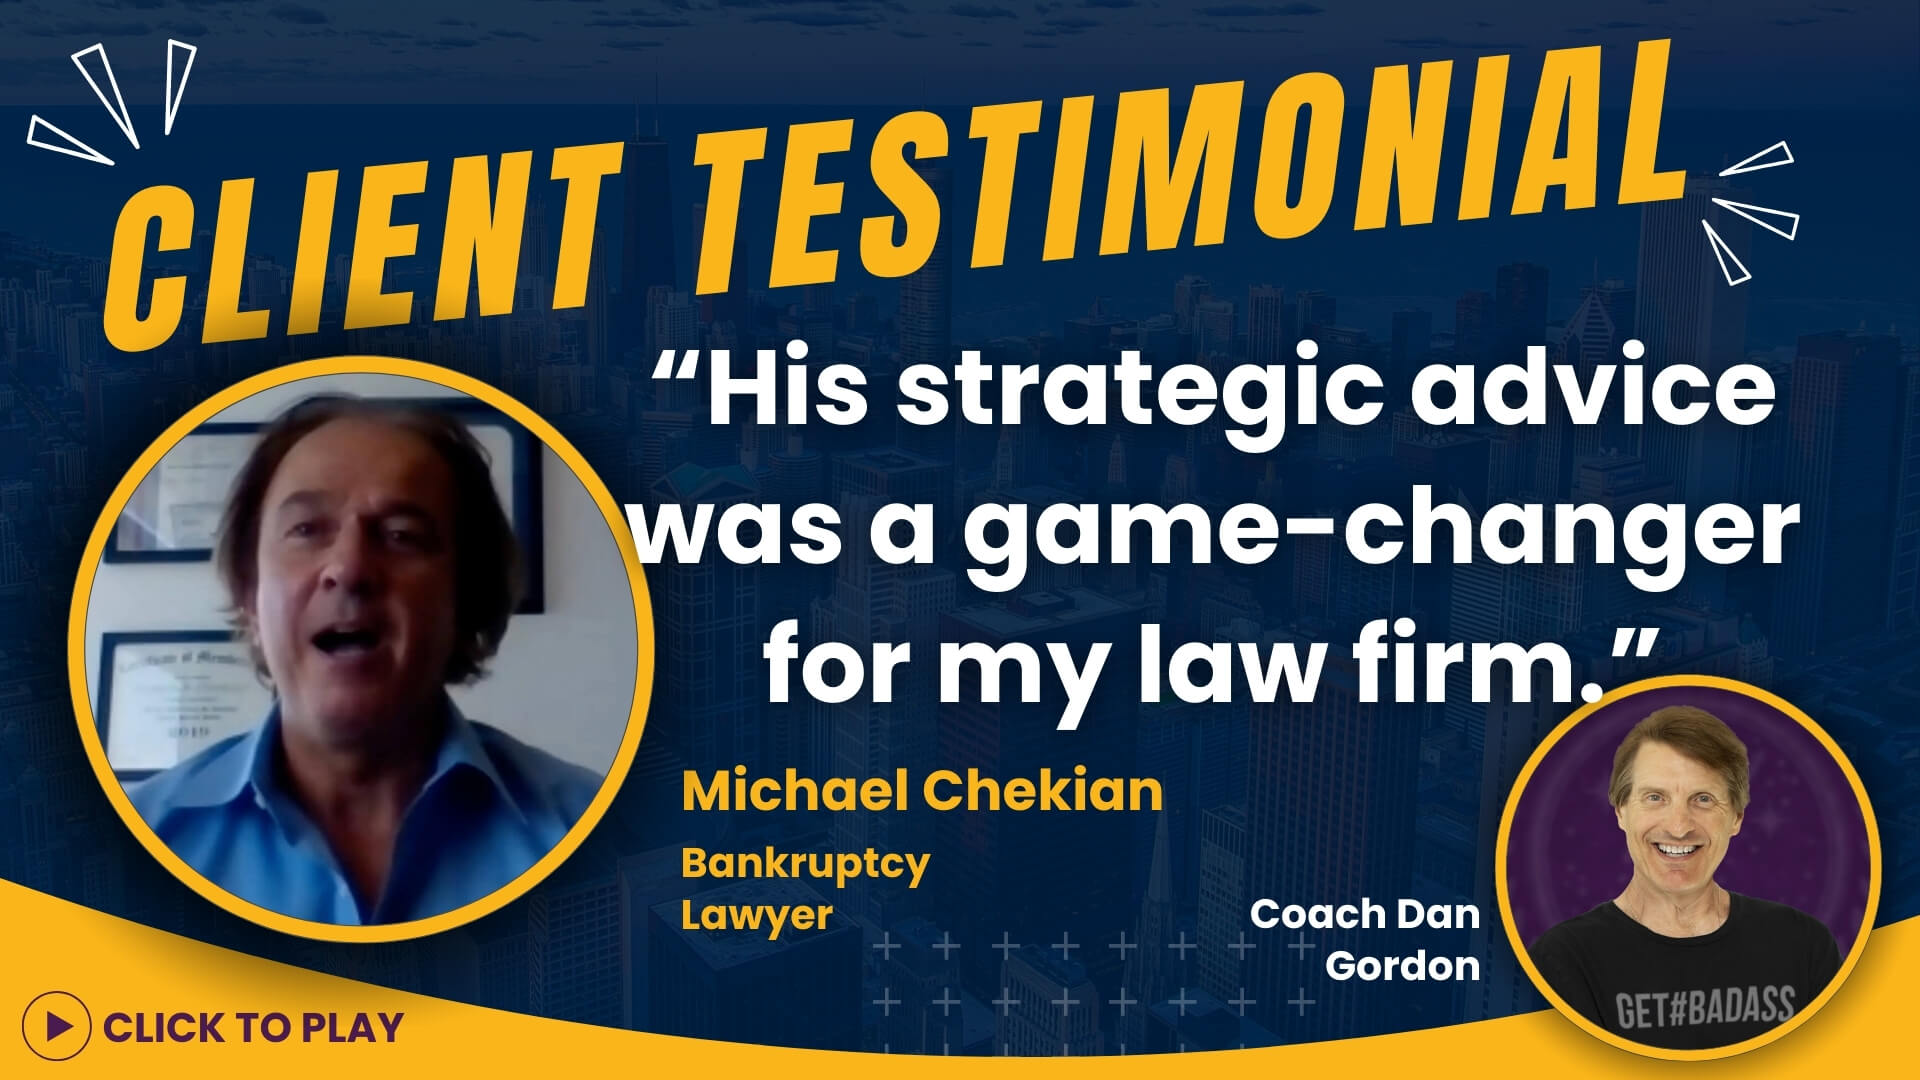 Testimonial by Michael Chekian, Bankruptcy Lawyer, praising Coach Dan Gordon's strategic advice as a game-changer, highlighted with friendly portraits and an inviting quote.